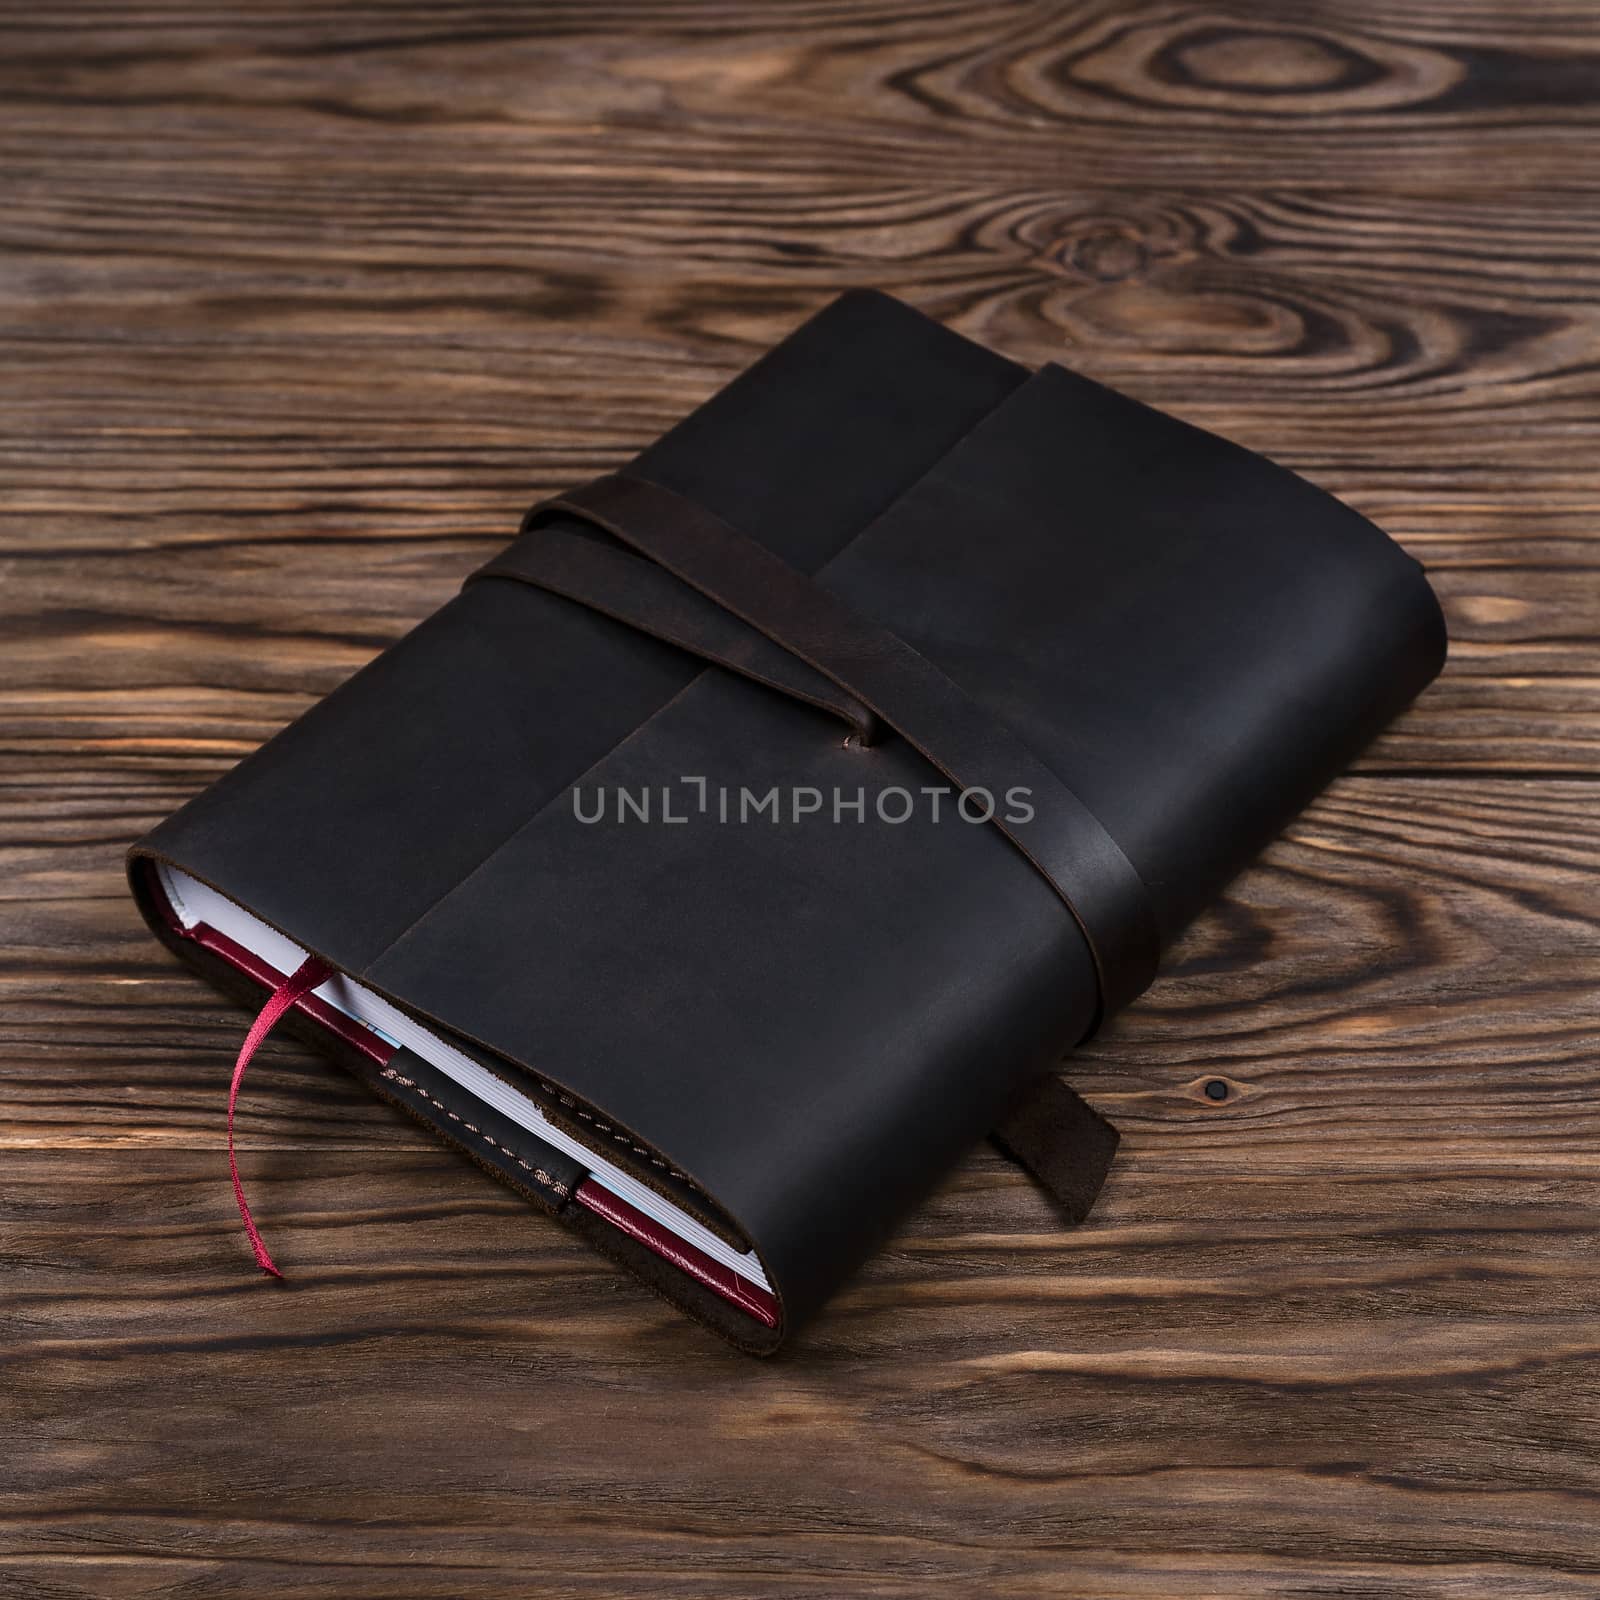 Black handmade leather notebook cover with notebook inside on wooden background. Stock photo of luxury business accessories.